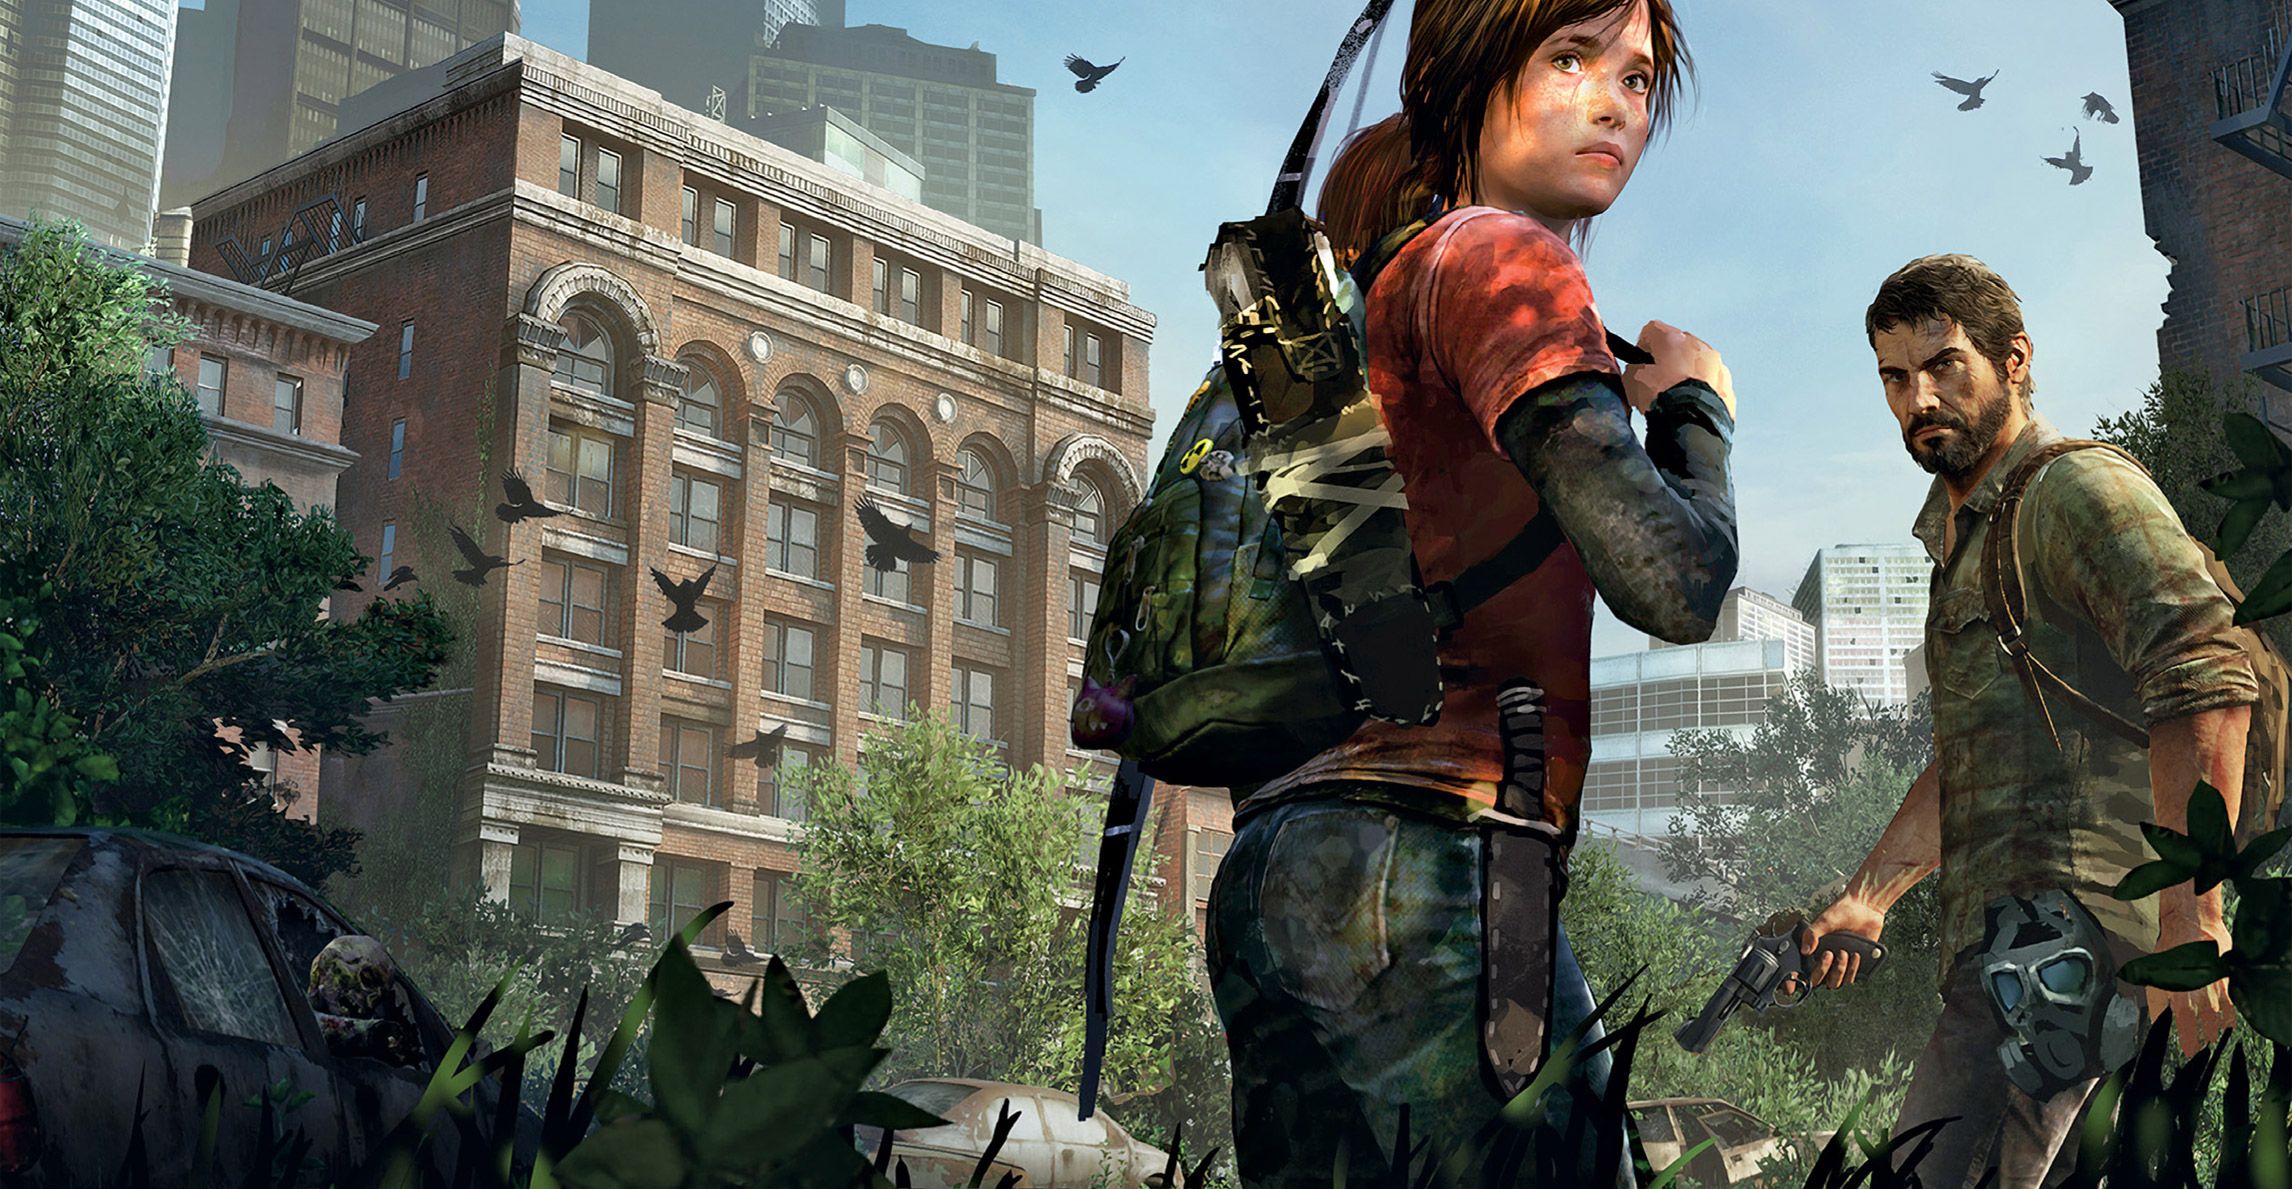 HD desktop wallpaper: Video Game, The Last Of Us download free picture  #590705